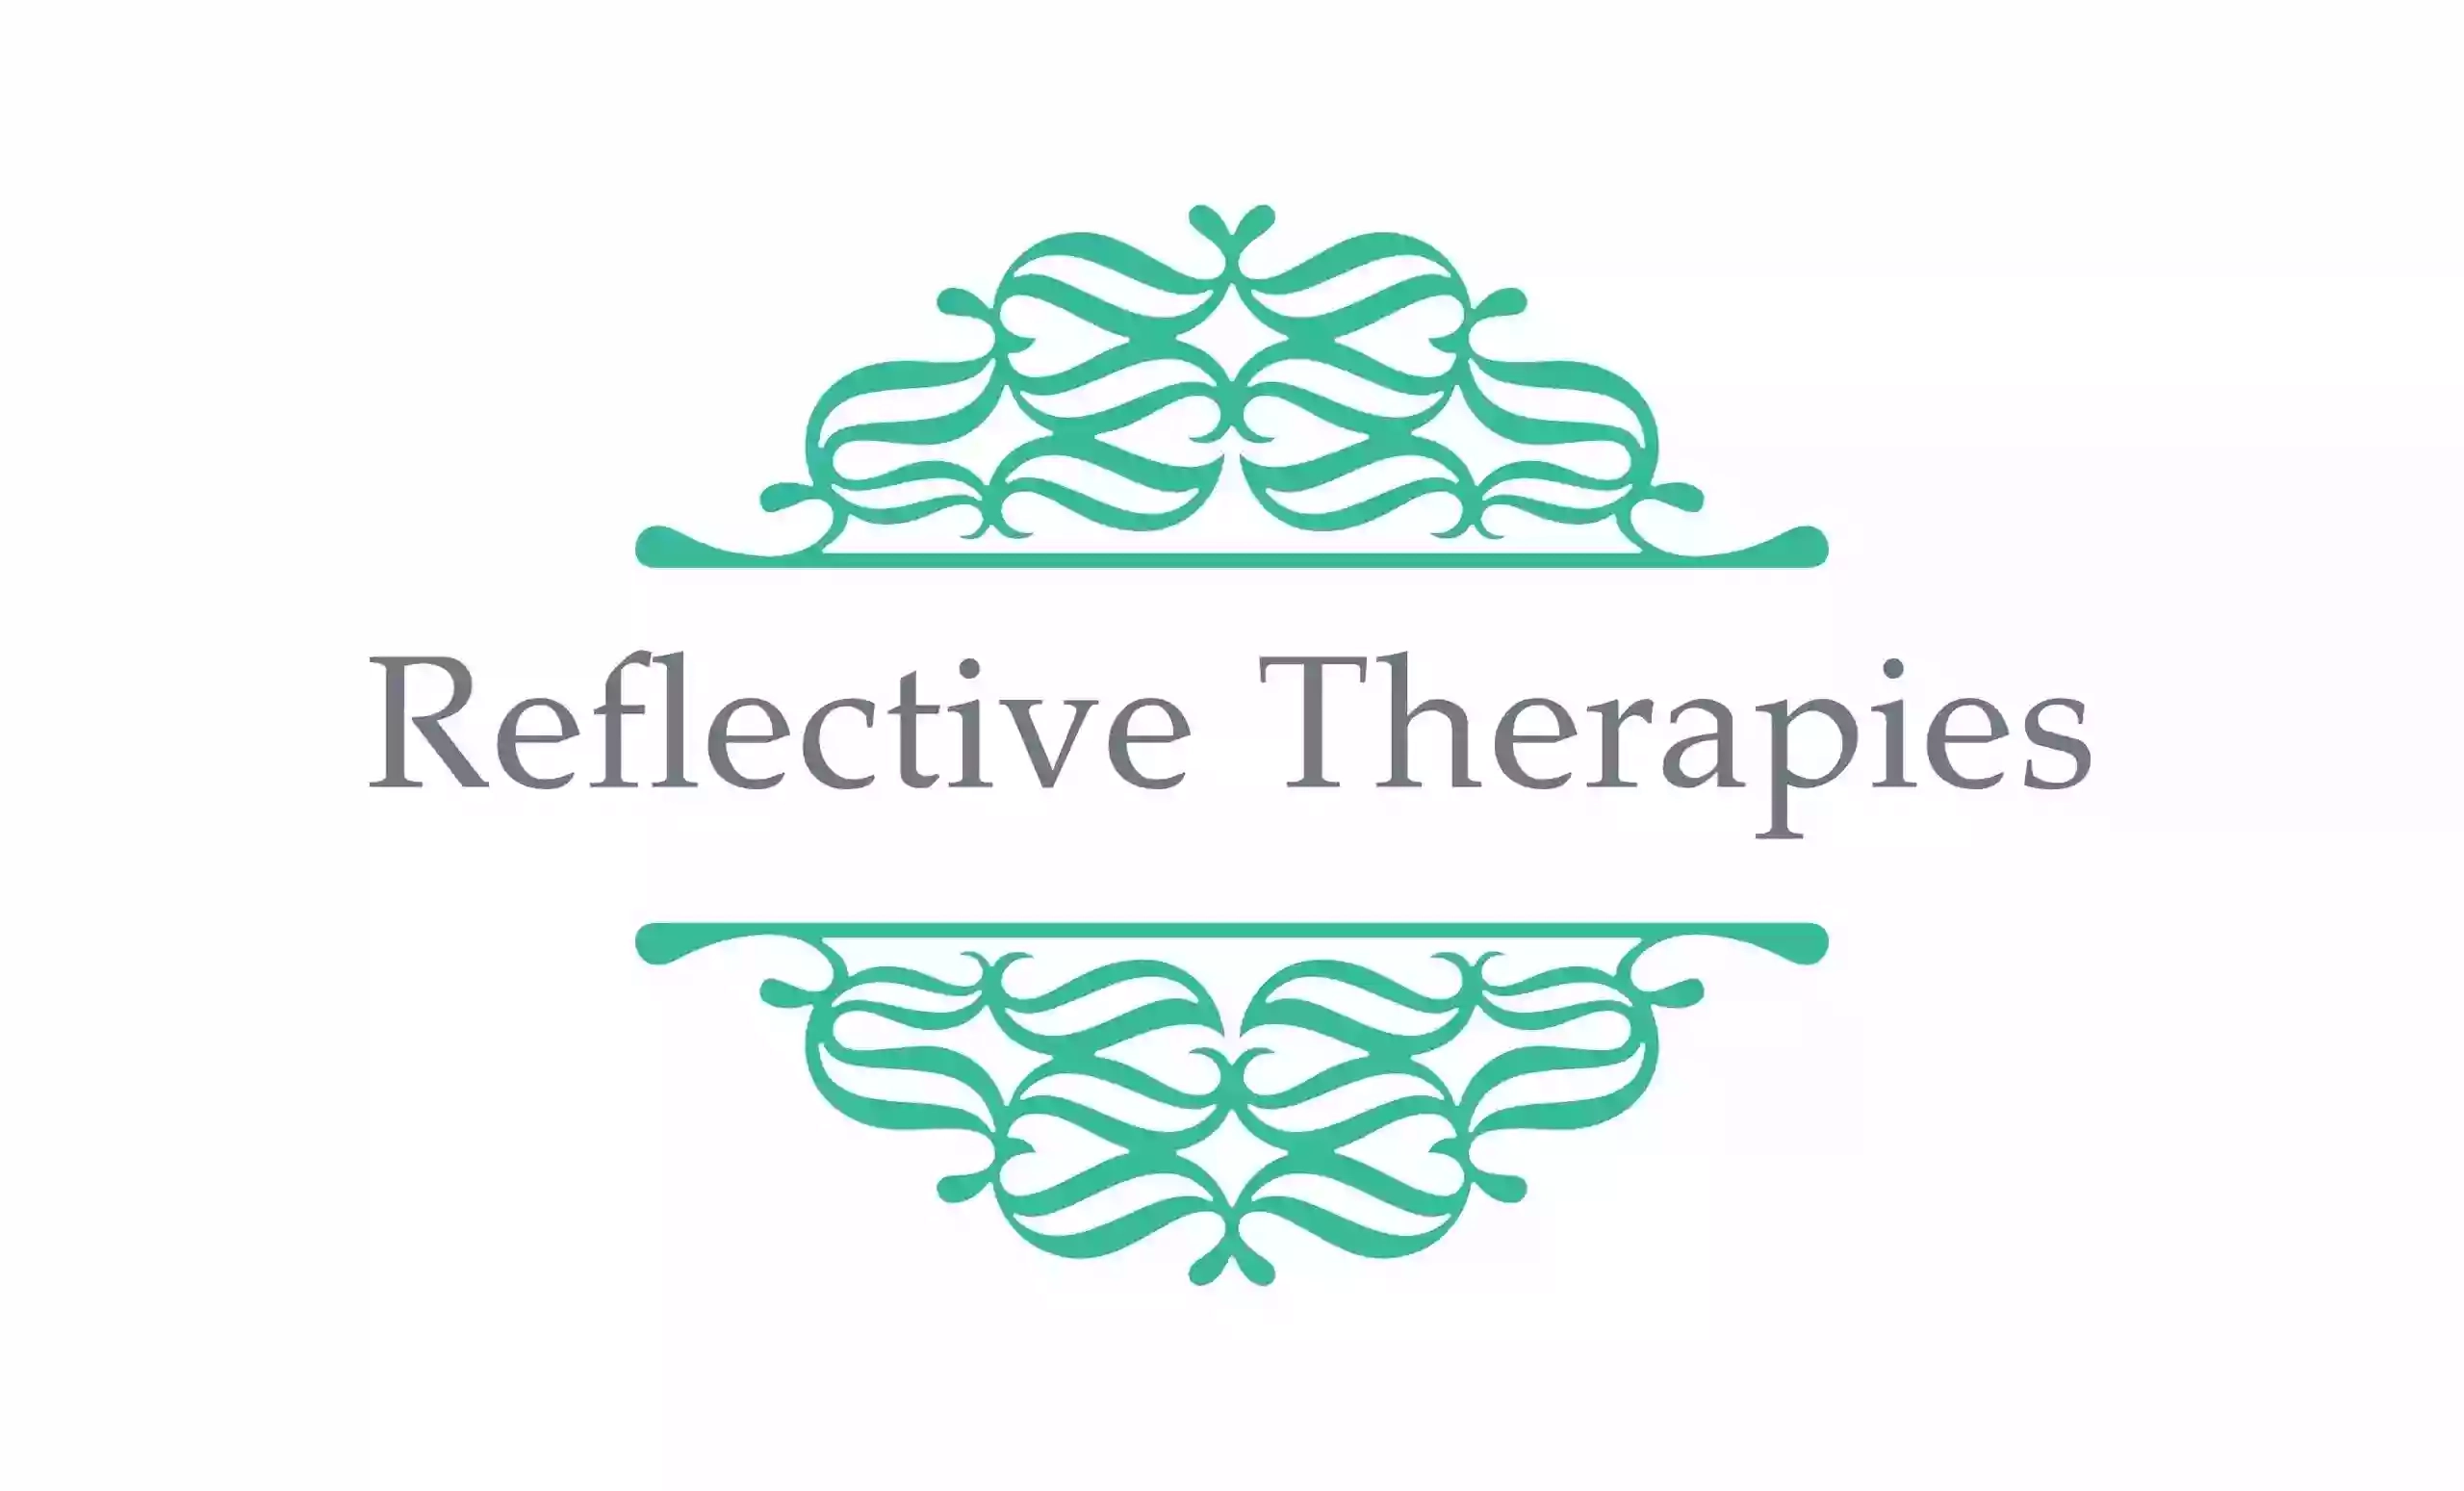 Reflective Therapies